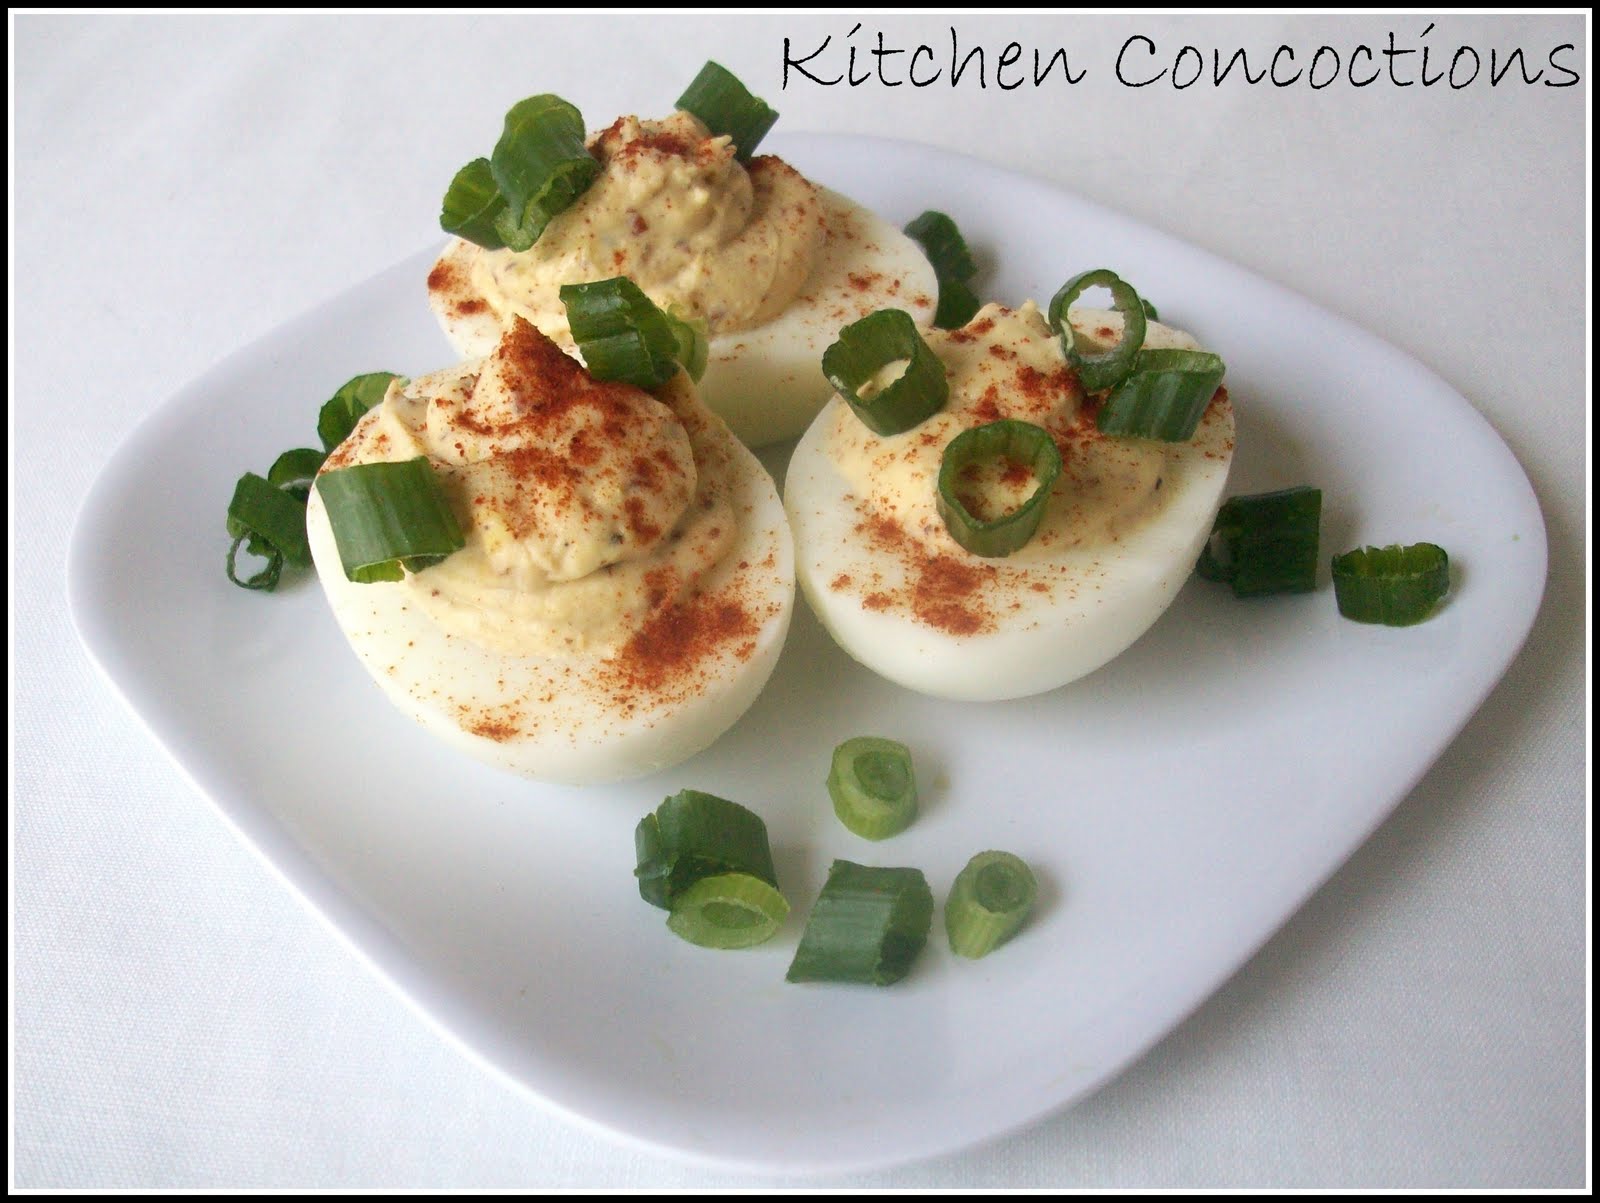 Deviled+eggs+with+bacon+bits+recipe